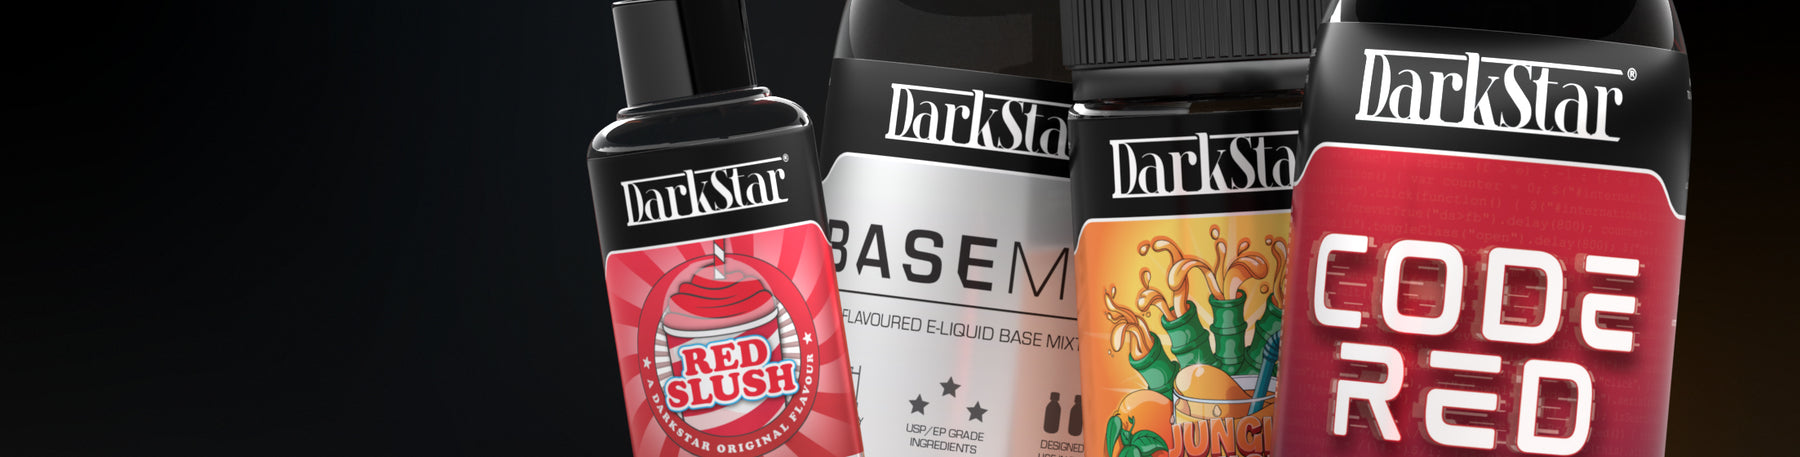 DarkStar Products Explained